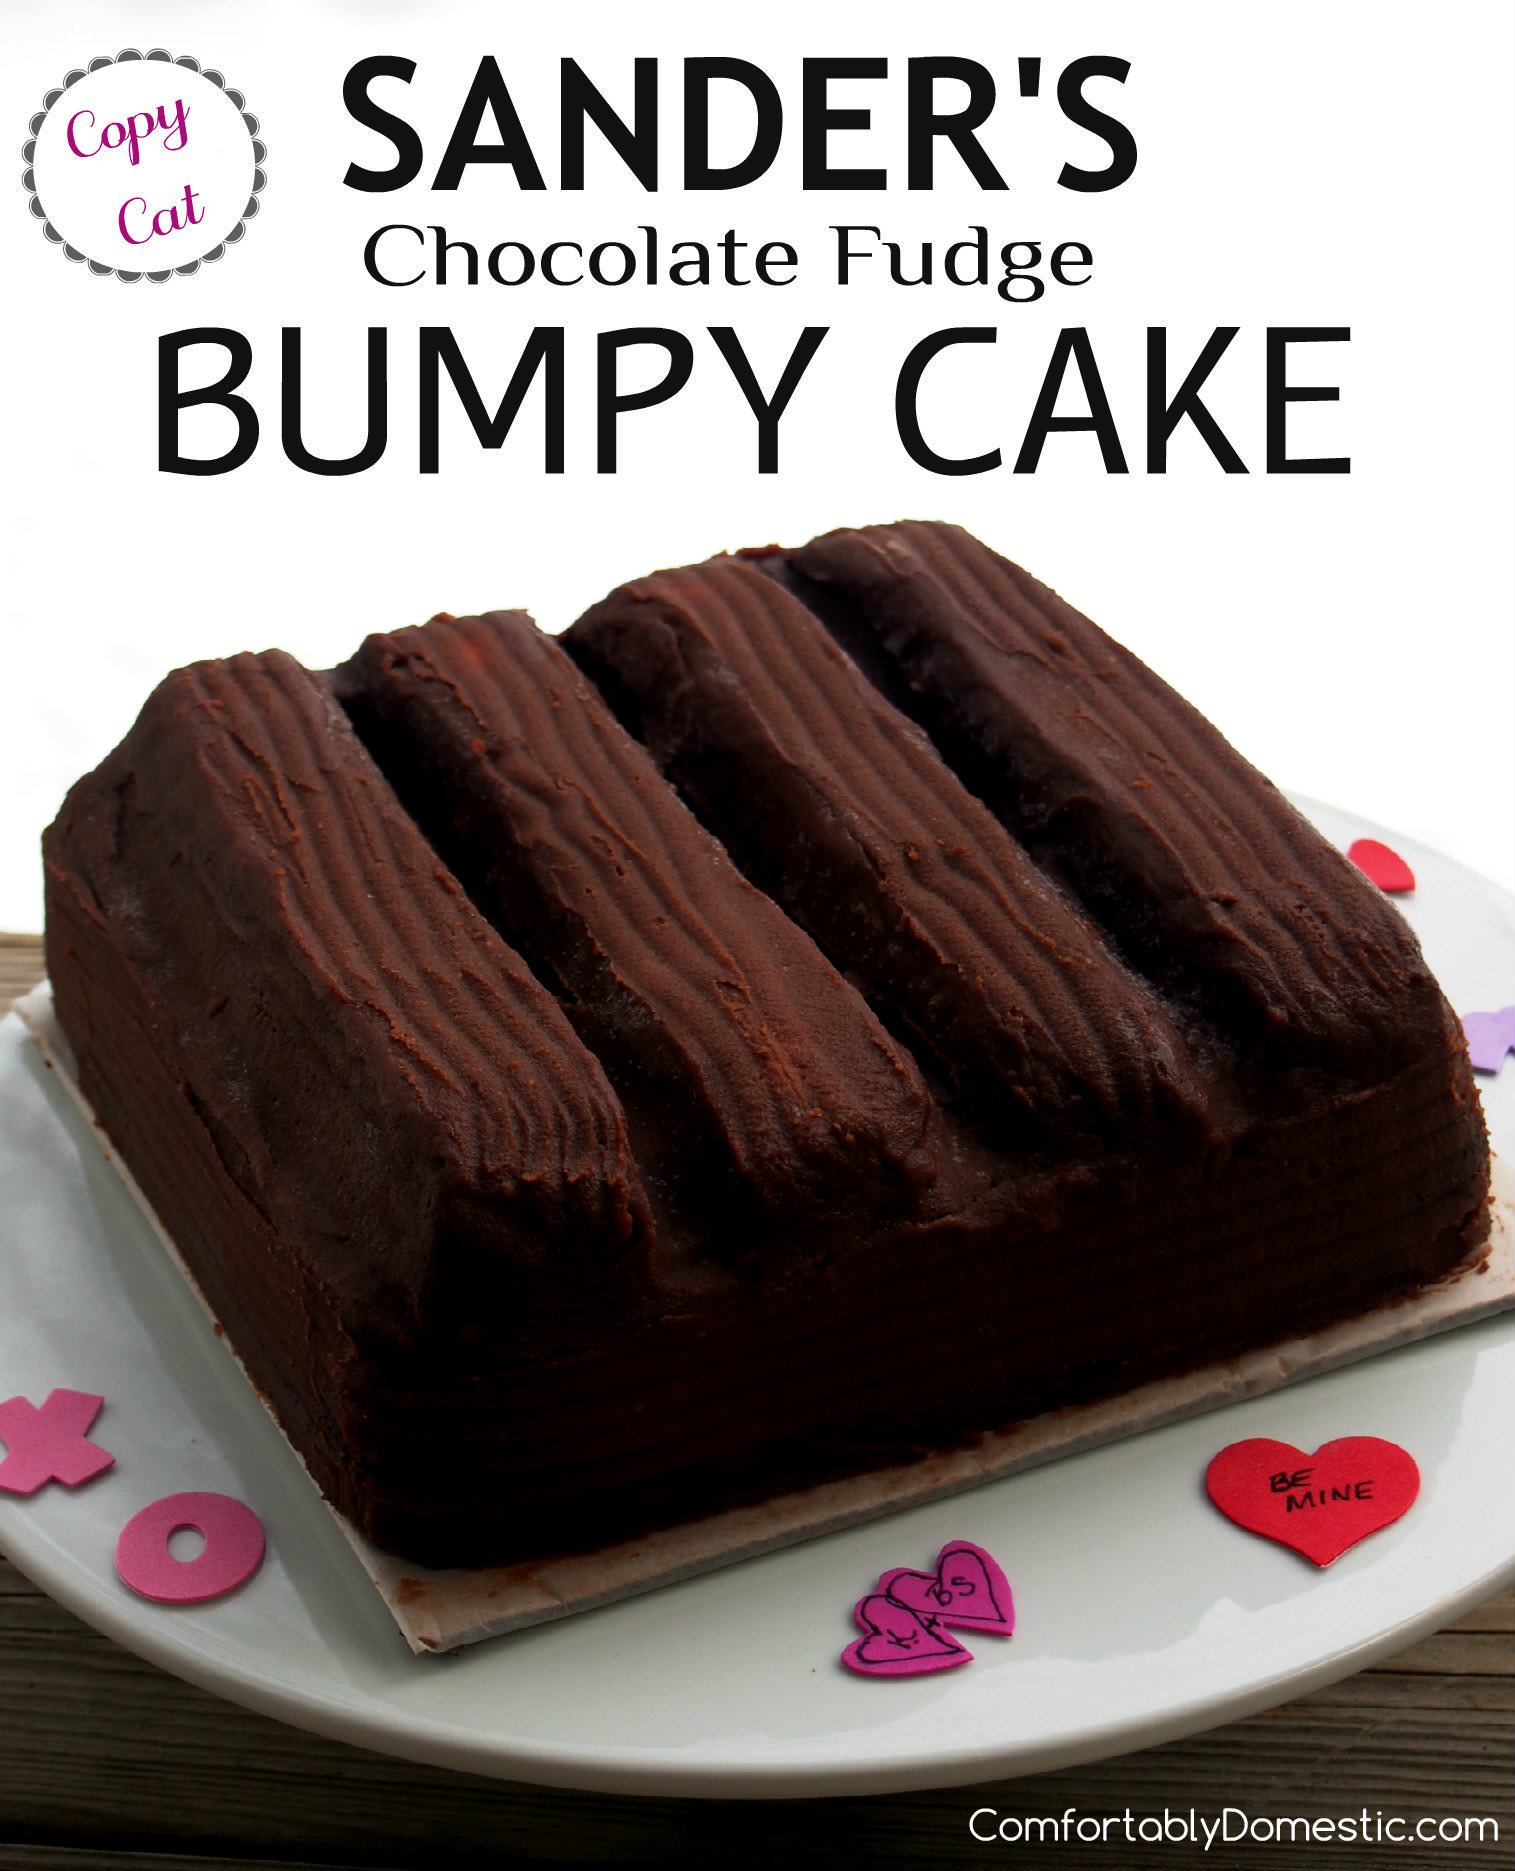 Chocolate Fudge Bumpy Cake is deliciously soft buttermilk chocolate cake, topped with cream filling and coated in pourable fudge. A homemade copycat recipe of the iconic Sander's Bumpy Cake, originally made in Detroit. | ComfortablyDomestic.com